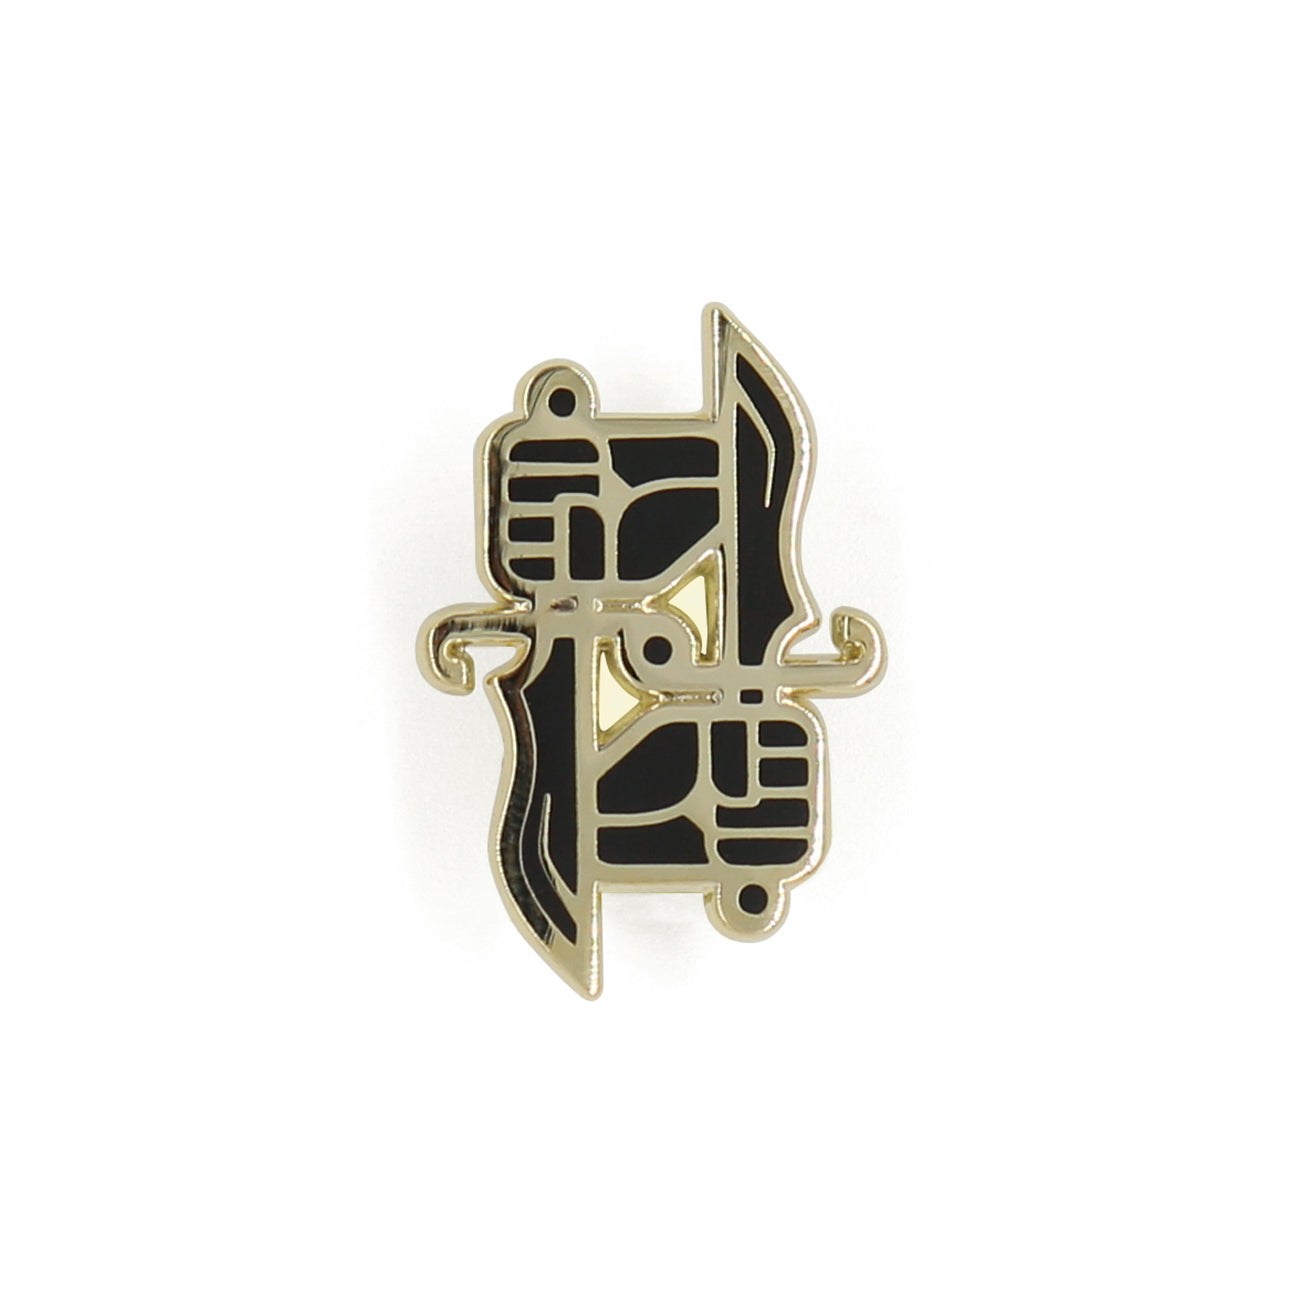 Gold and black enamel pin of the Dual Wield Studio logo: two hands hold two opposing daggers.